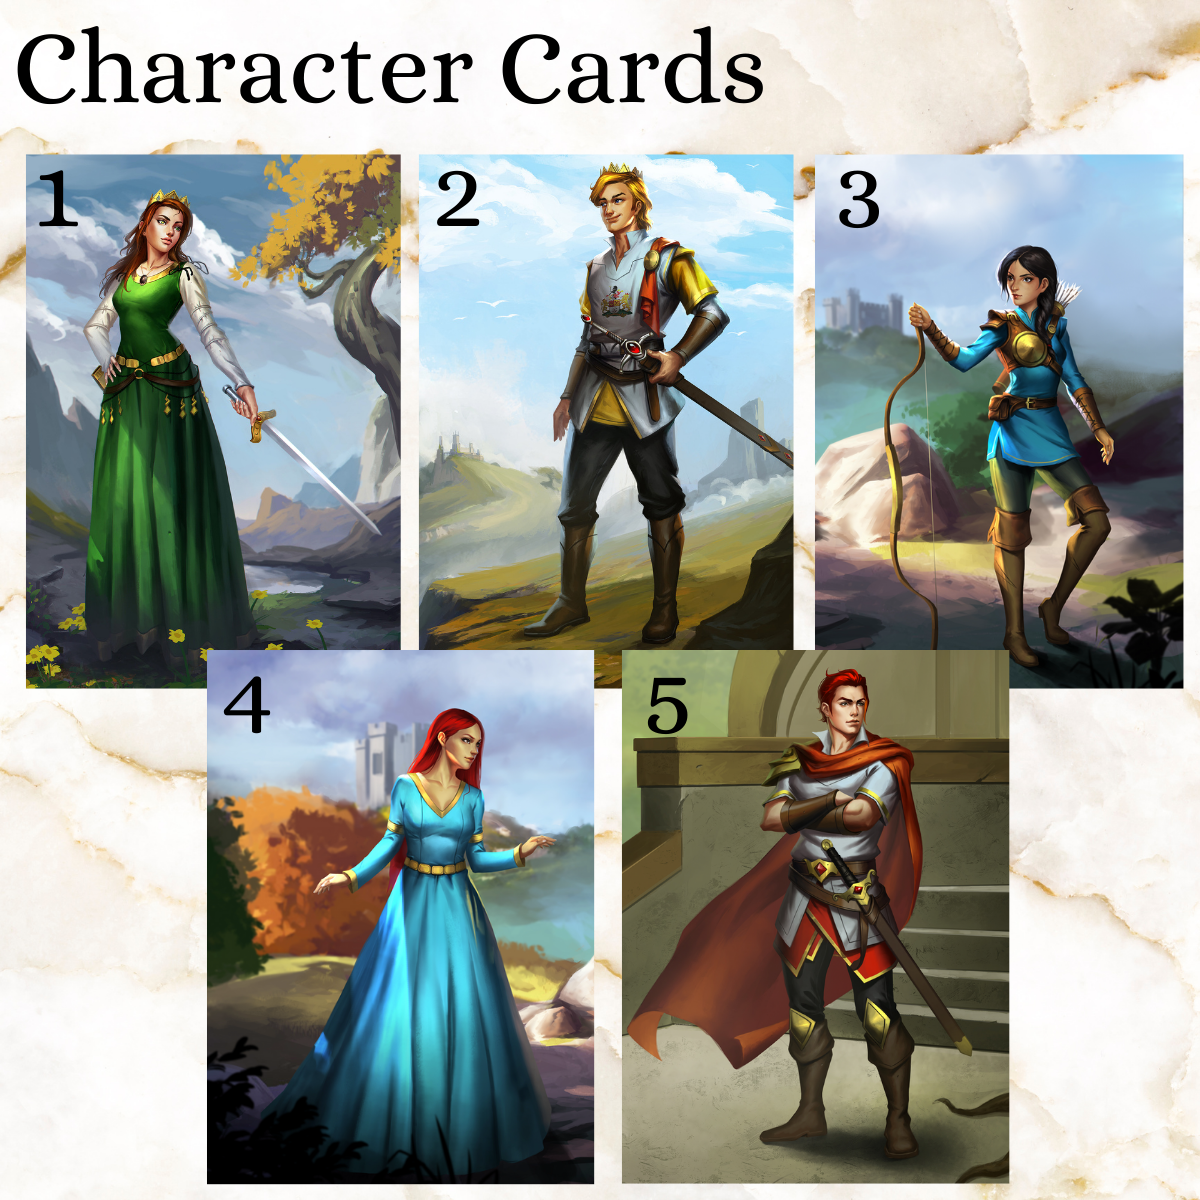 Character Art cards - 1 Princess Alex in a green dress, 2 Prince Aaron in his usual attire, 3 Edith Warren ladies maid in blue training tunic, 4 jessica lady of Datten in a blue dress, 5 Sir Stefan Alex's guard in Datten knight uniform